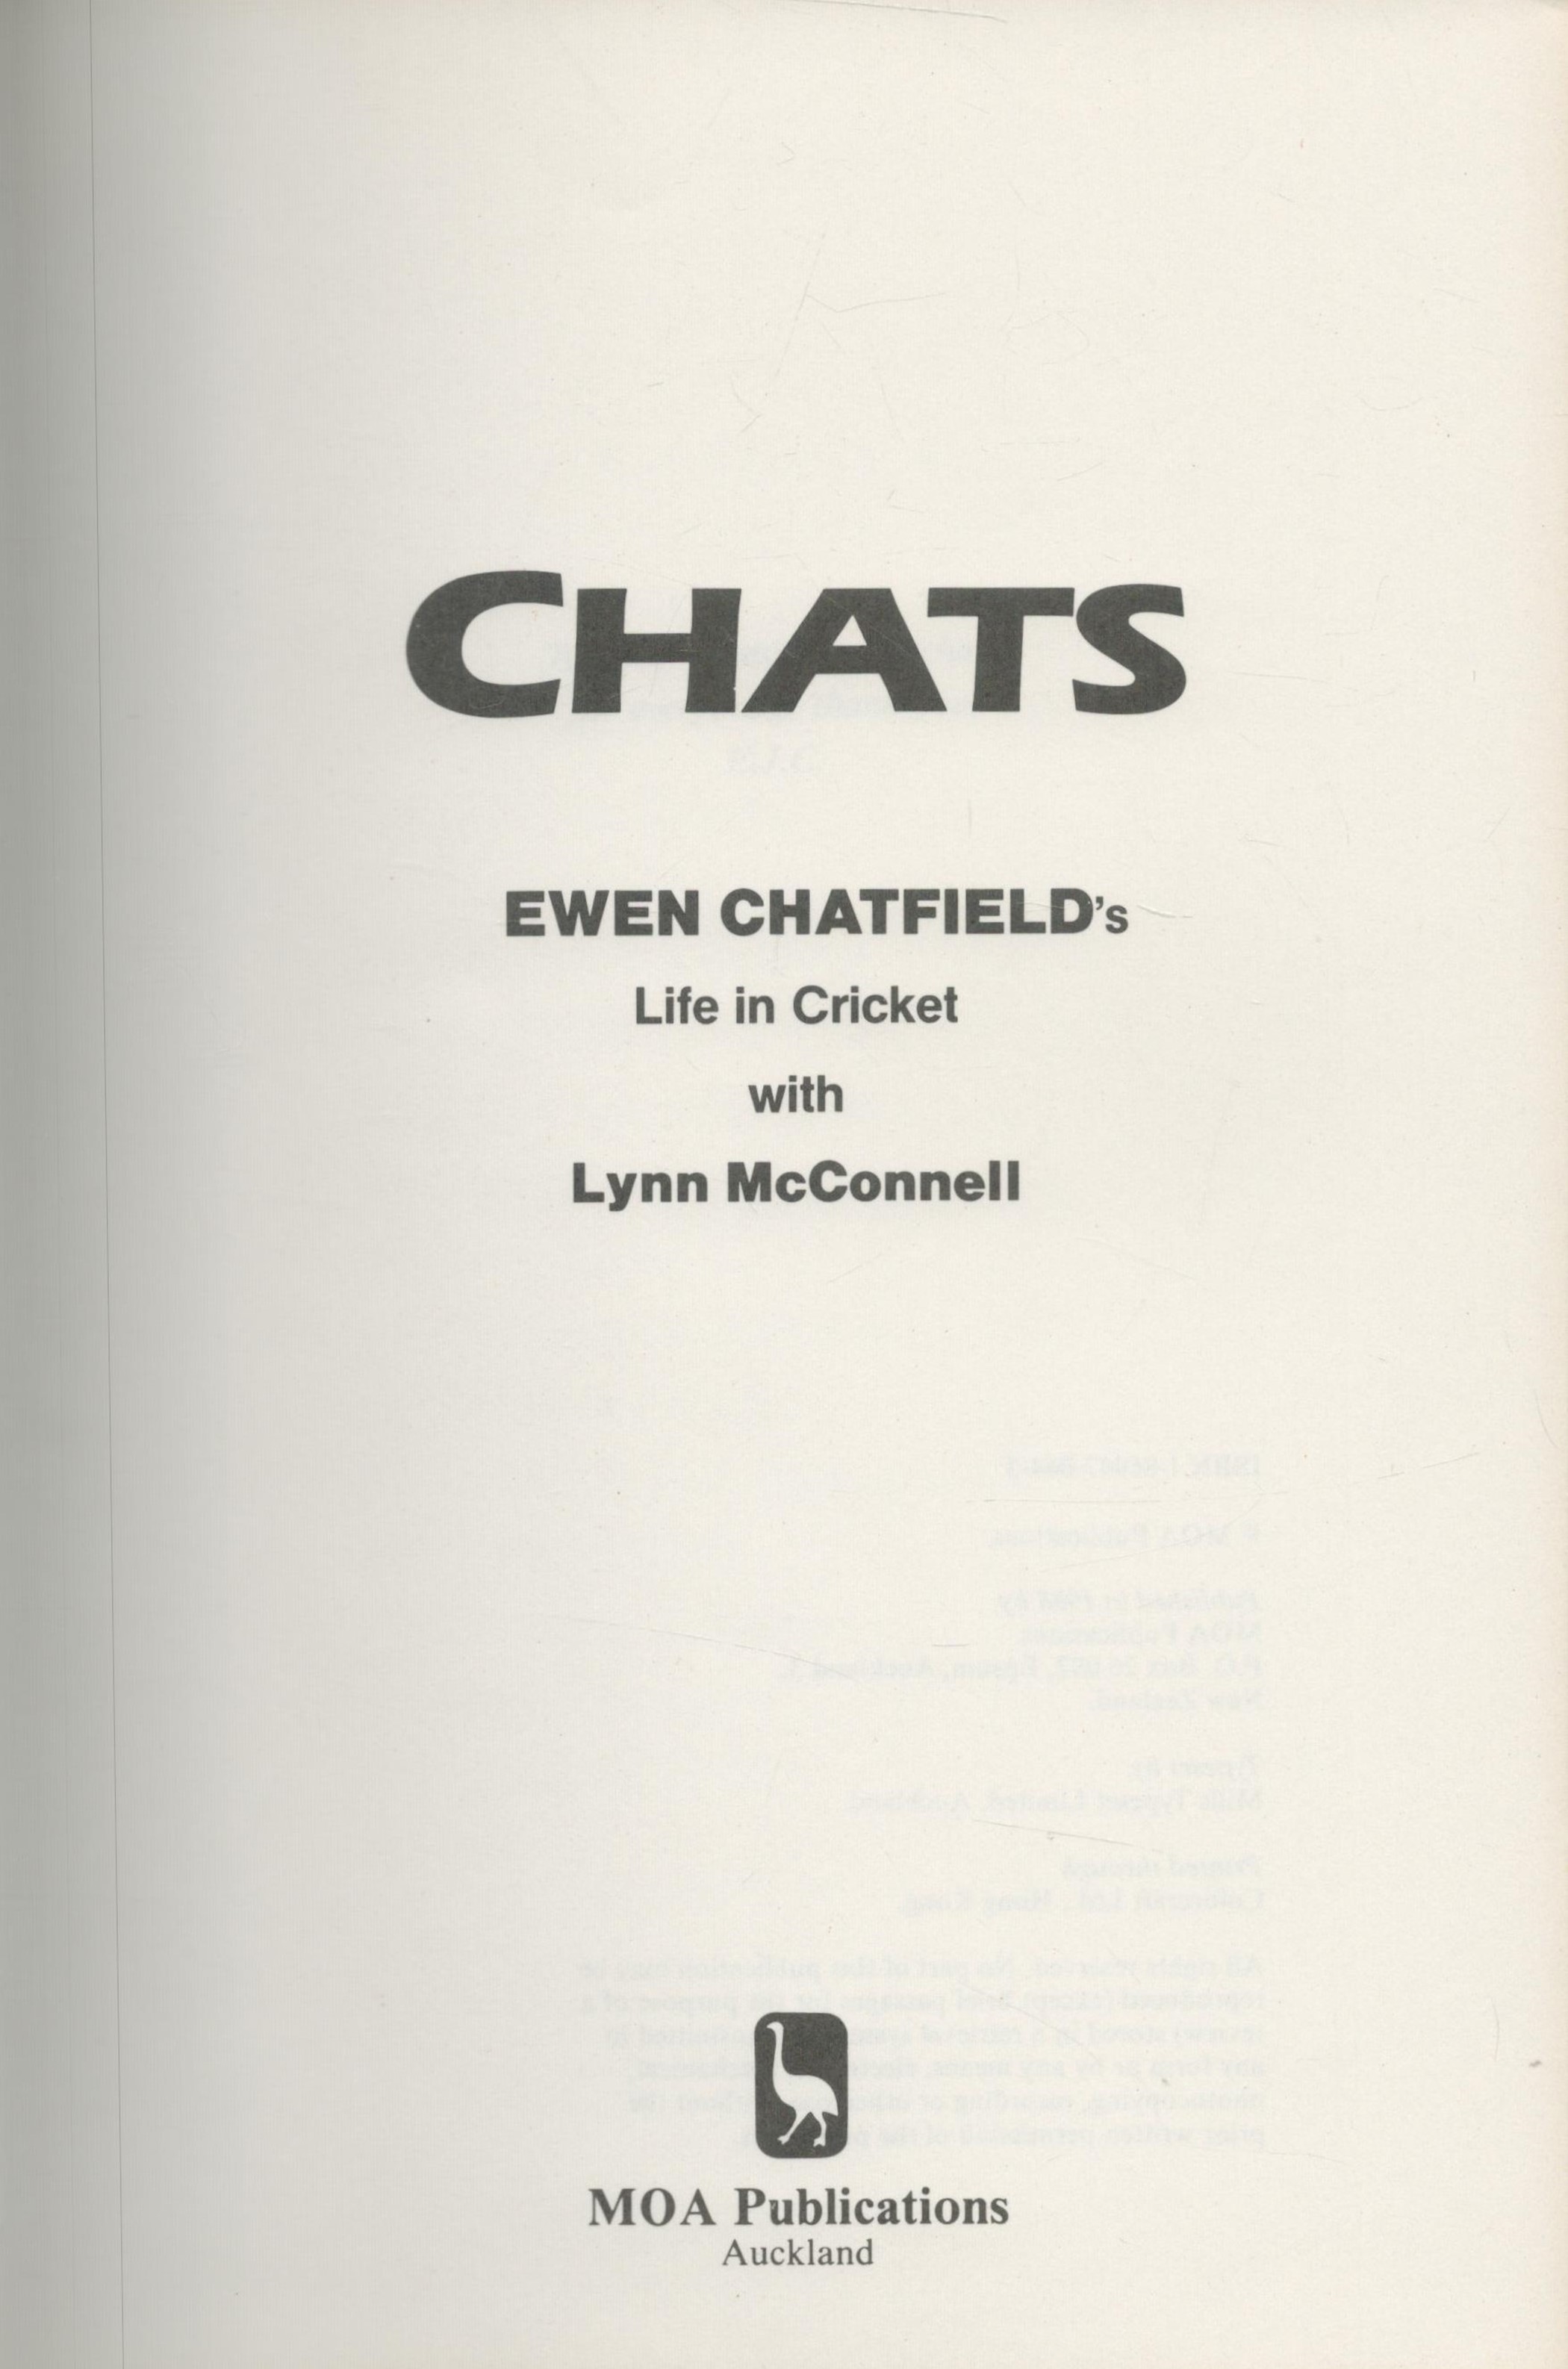 Chats by Ewen Chatfield`s Life in Cricket with Lynn McConnel hardback book. UNSIGNED. Good condition - Image 2 of 3